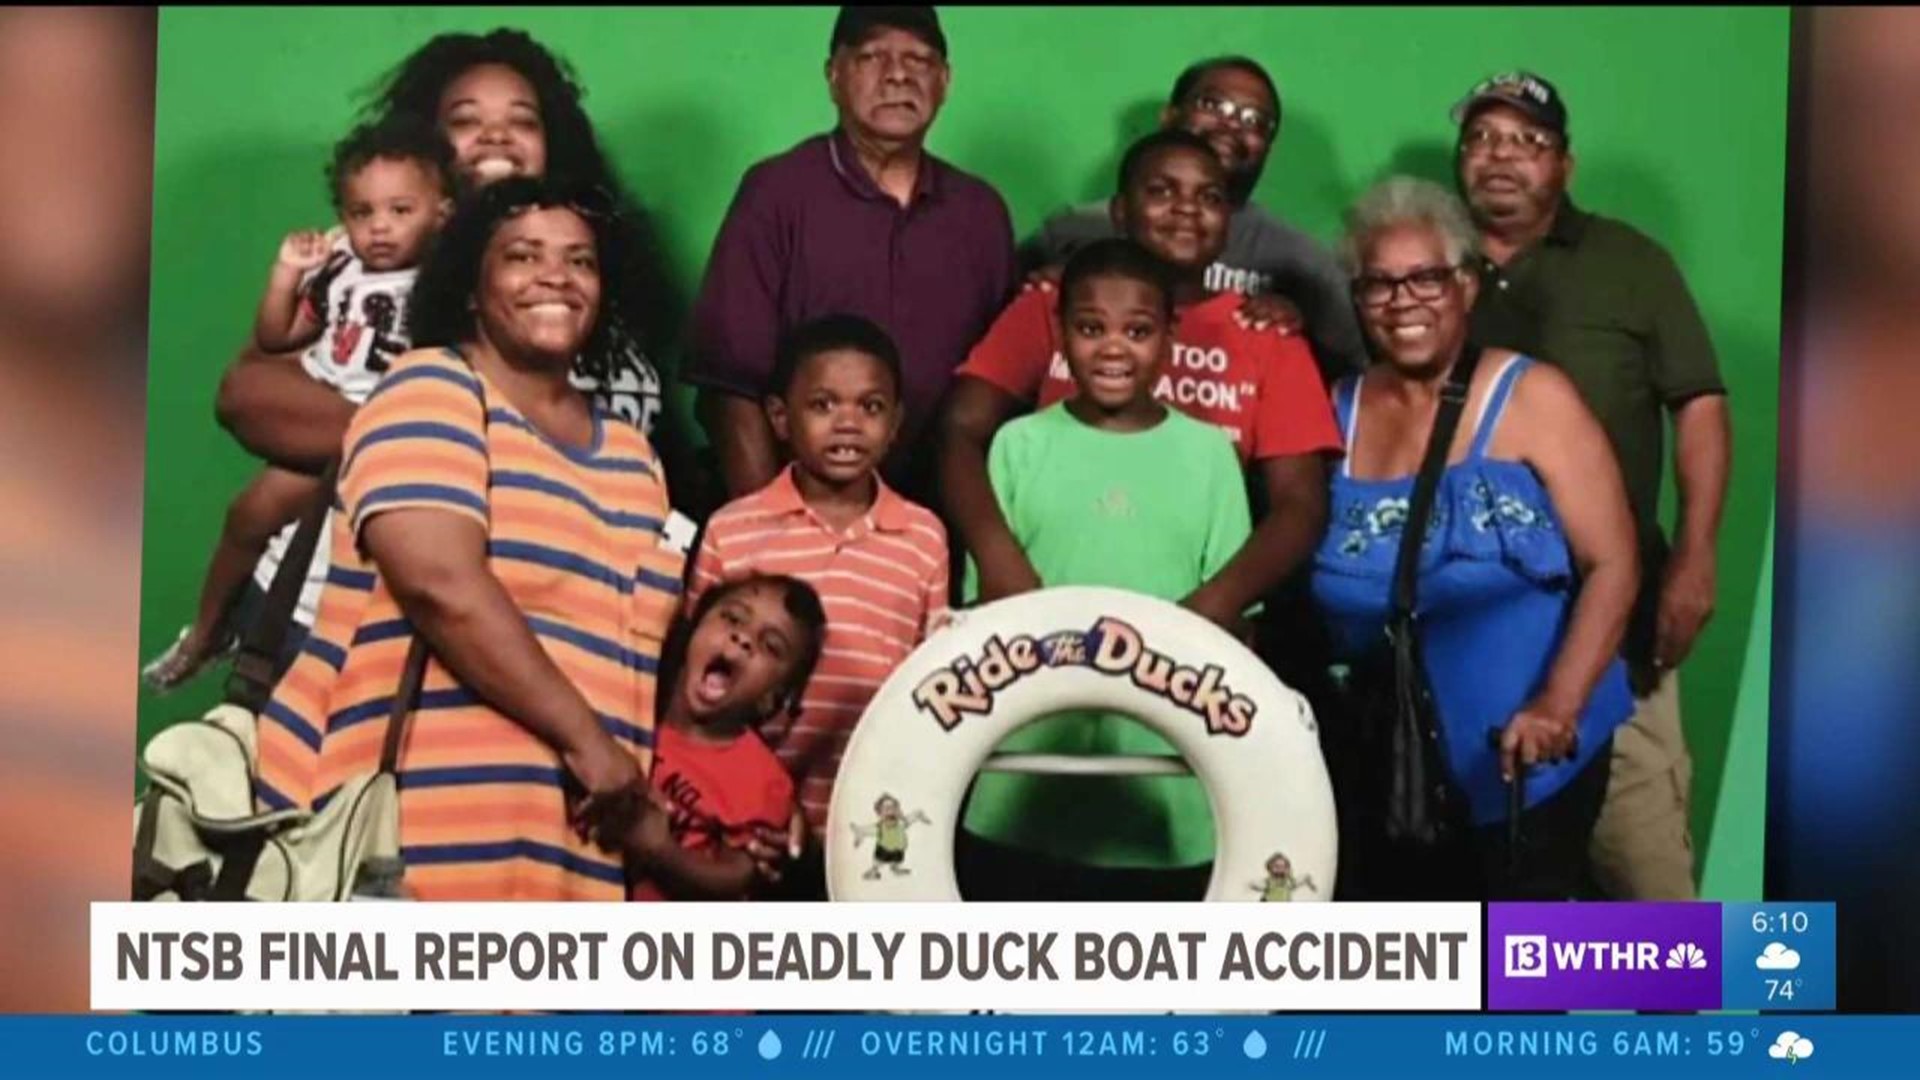 NTSB final report on deadly duck boat accident